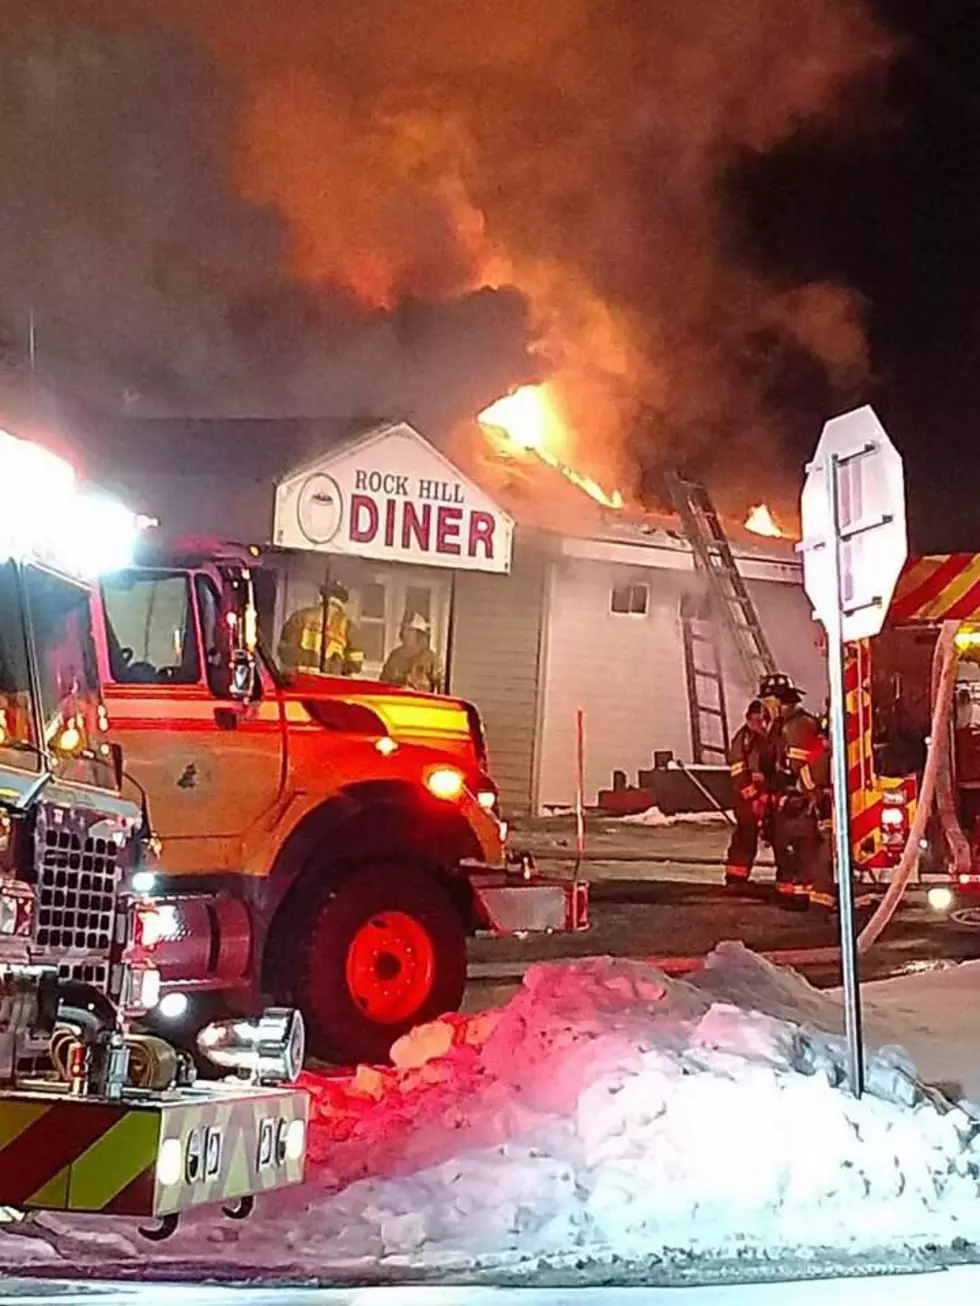 Popular Hudson Valley Diner Damaged in New Year's Fire 